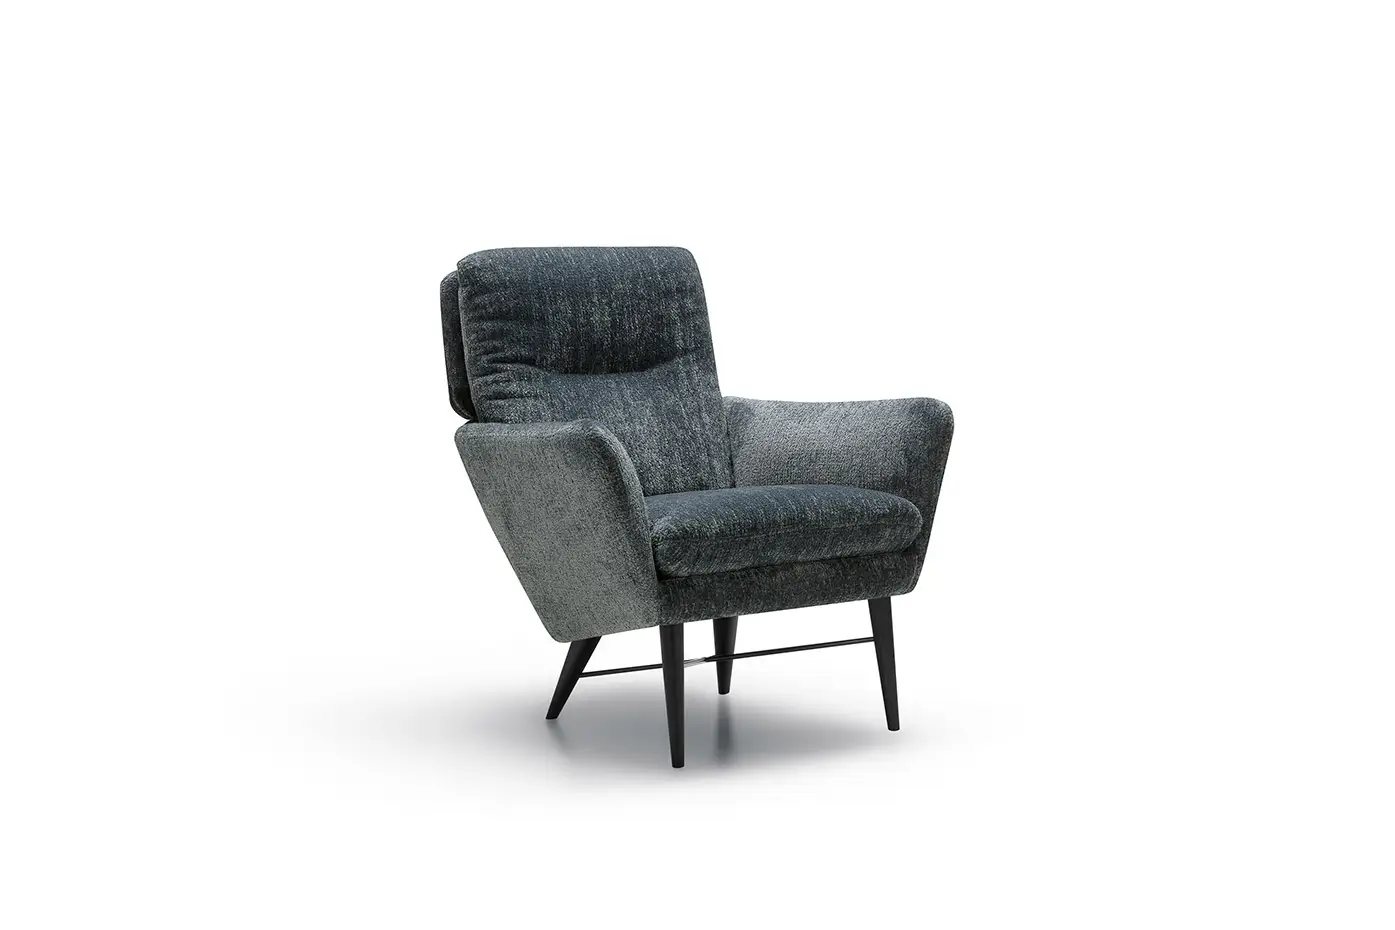 Armchairs, easy chairs, comfy chairs & more